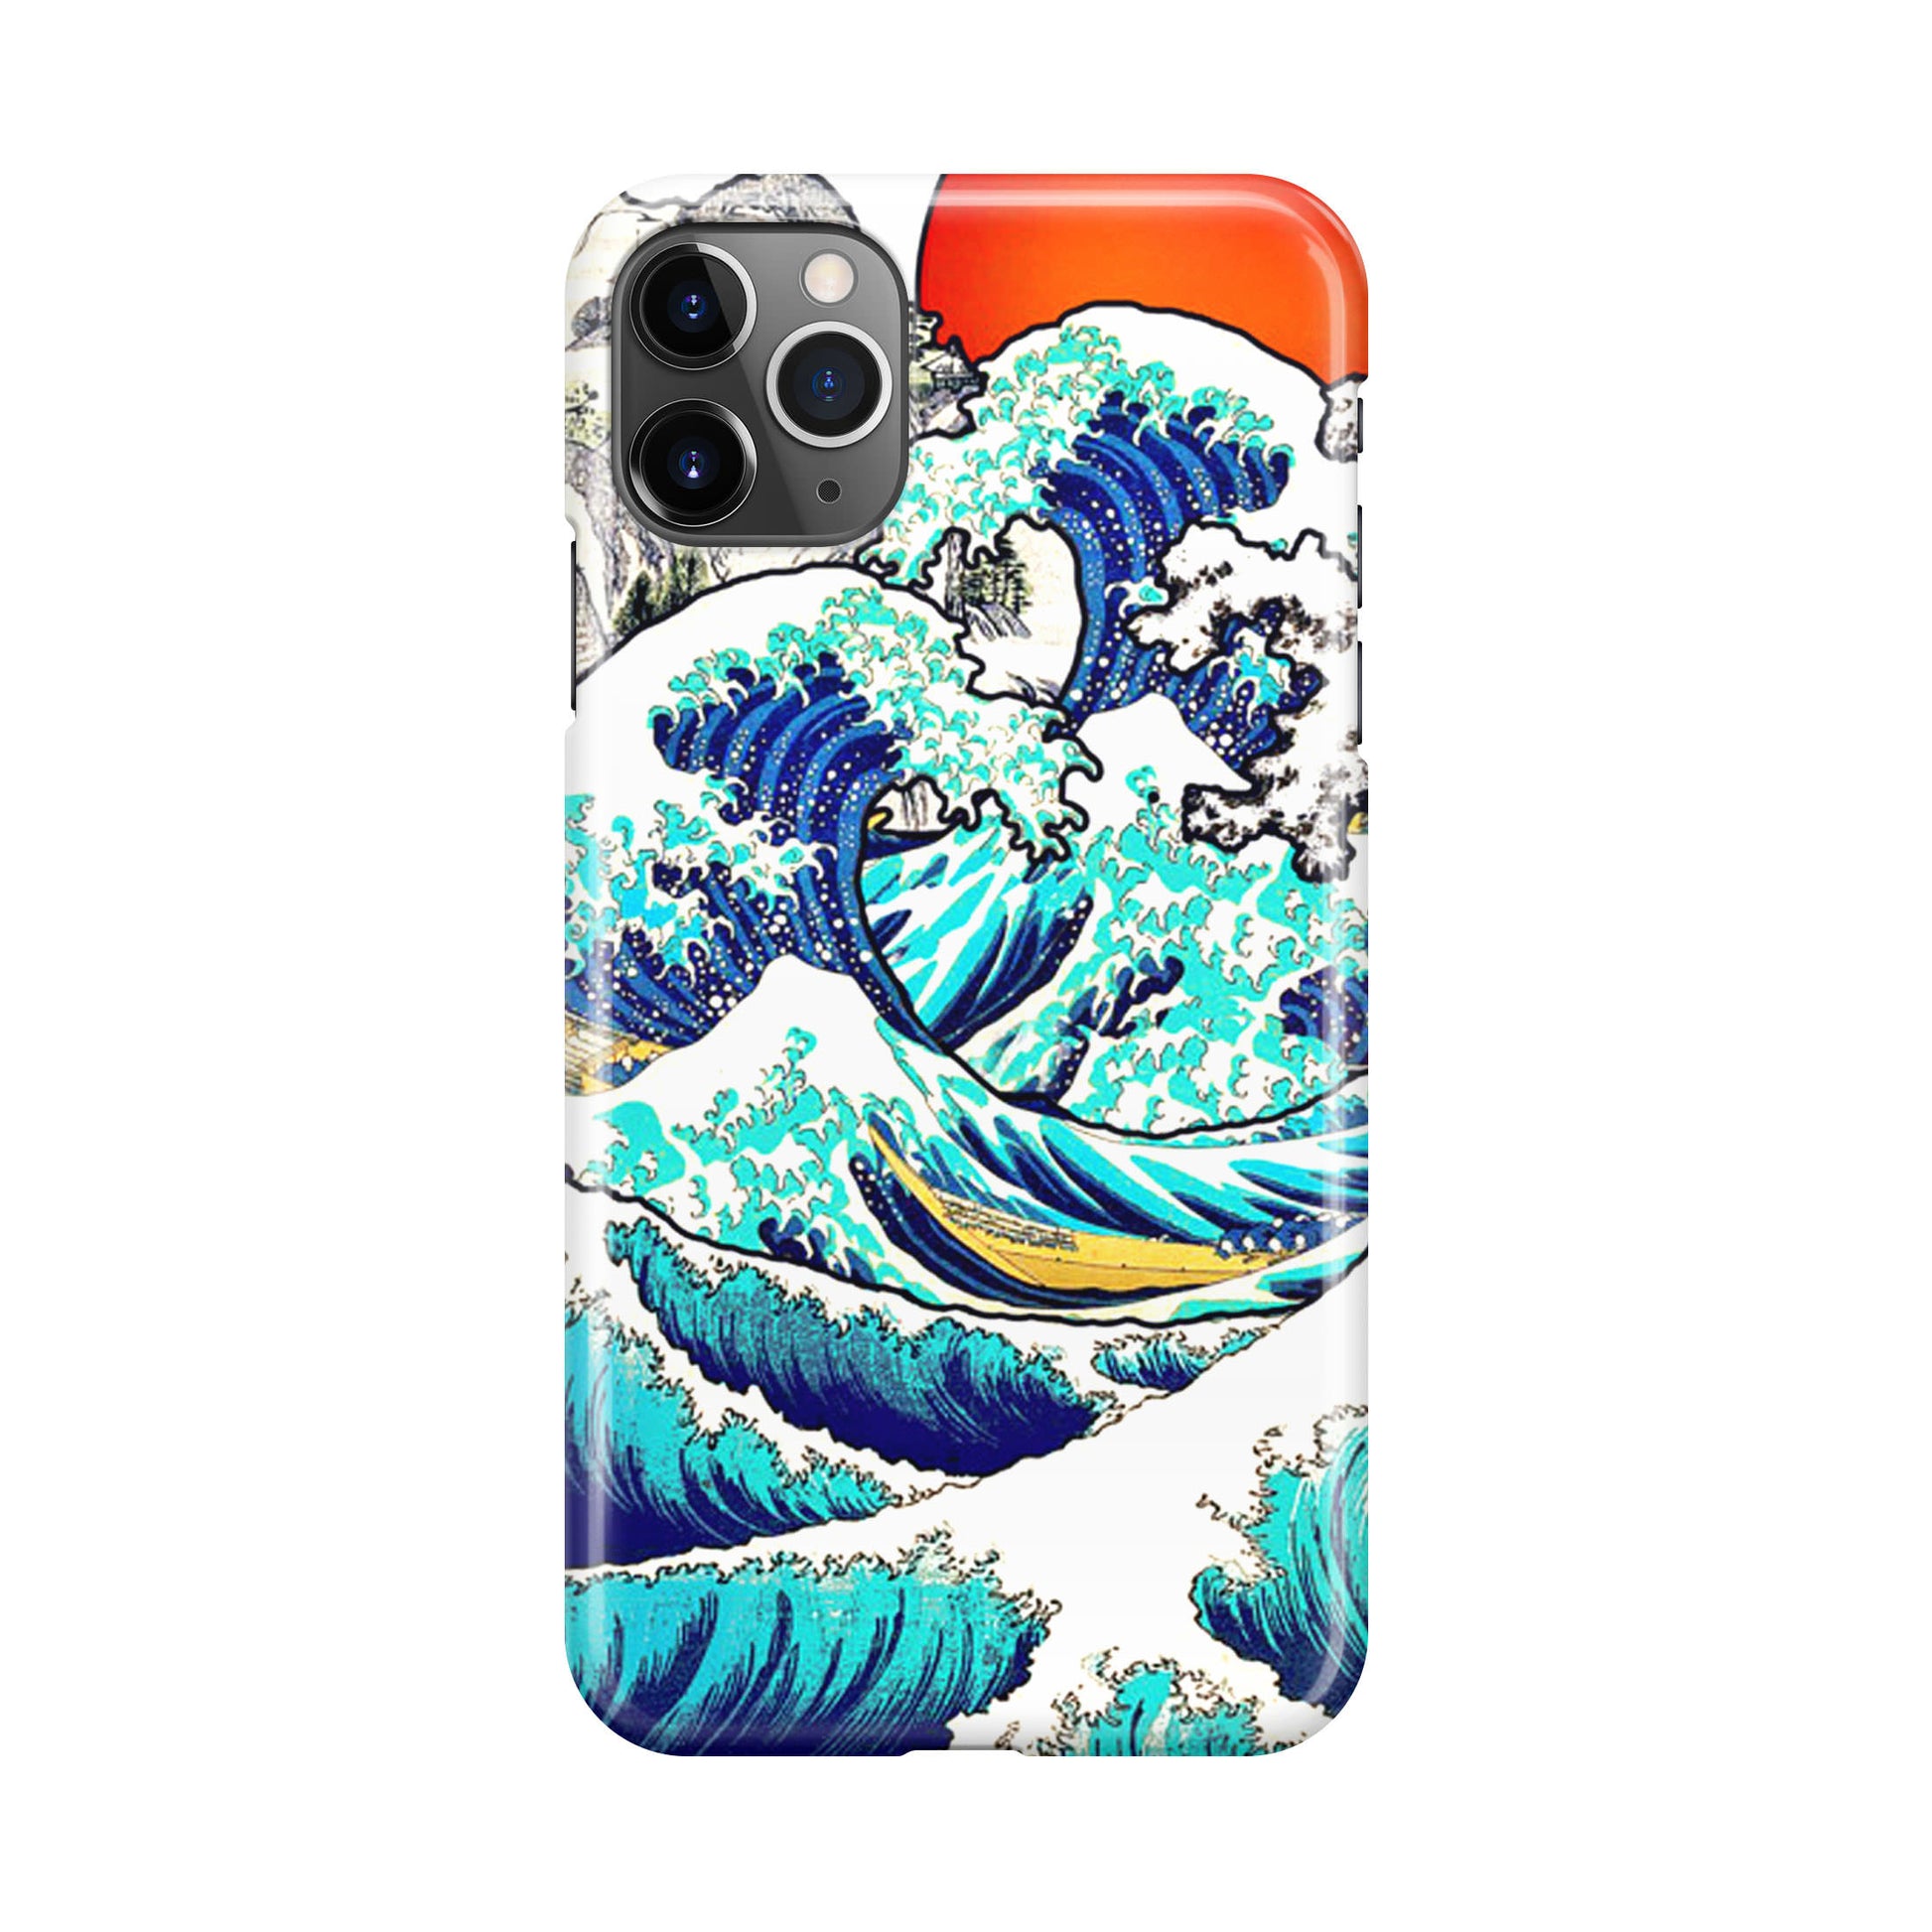 The Great Wave off Kanagawa iPhone 11 Pro Max Case